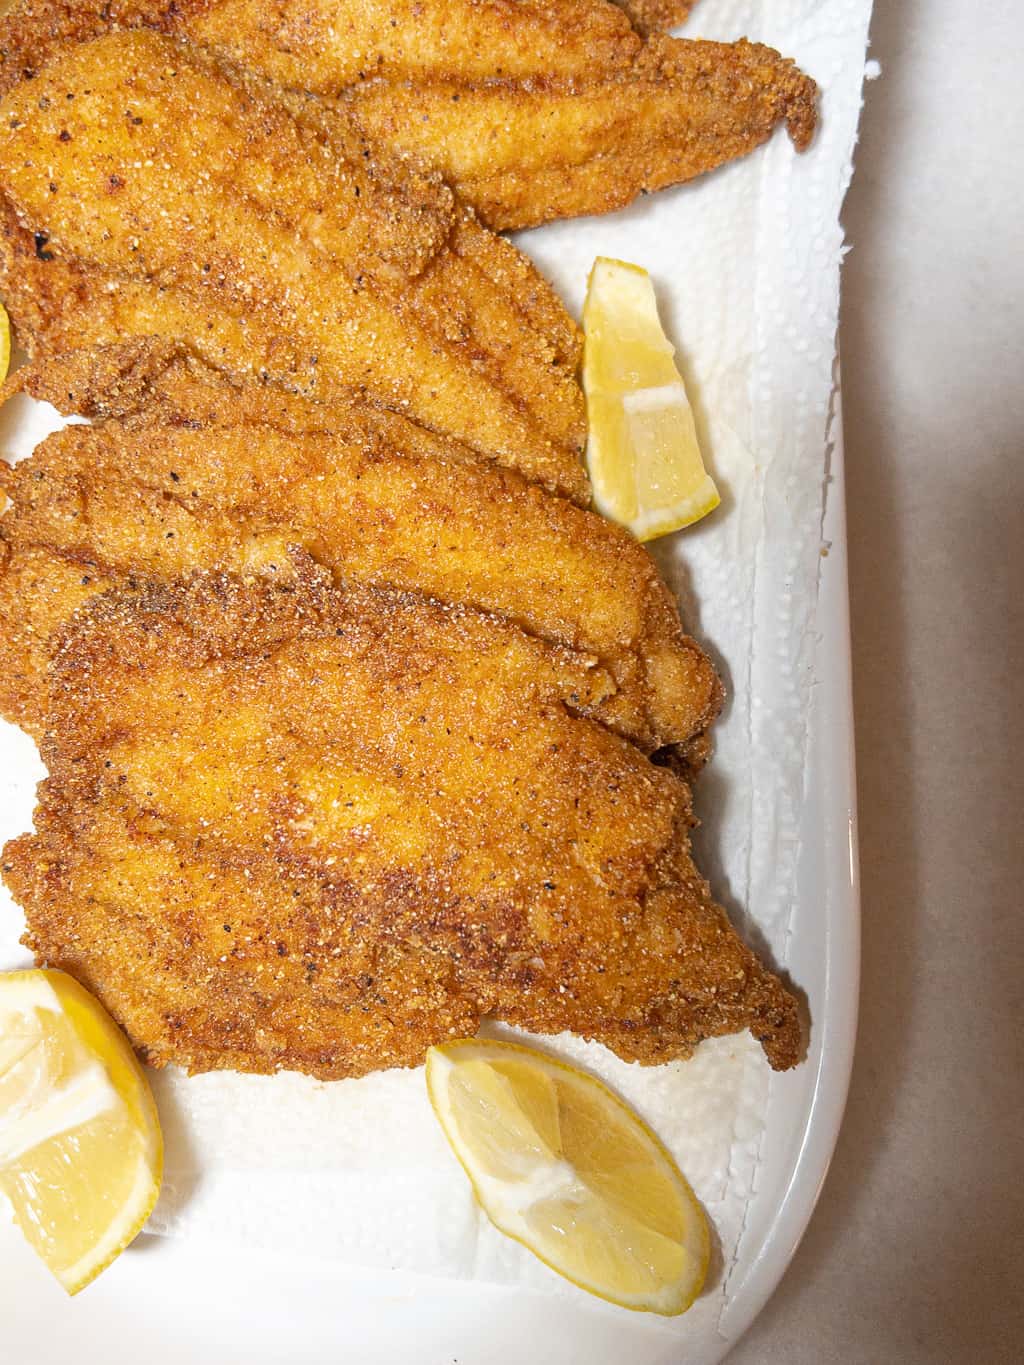 fried catfish filets on a platter with lemon wedges as a garnish